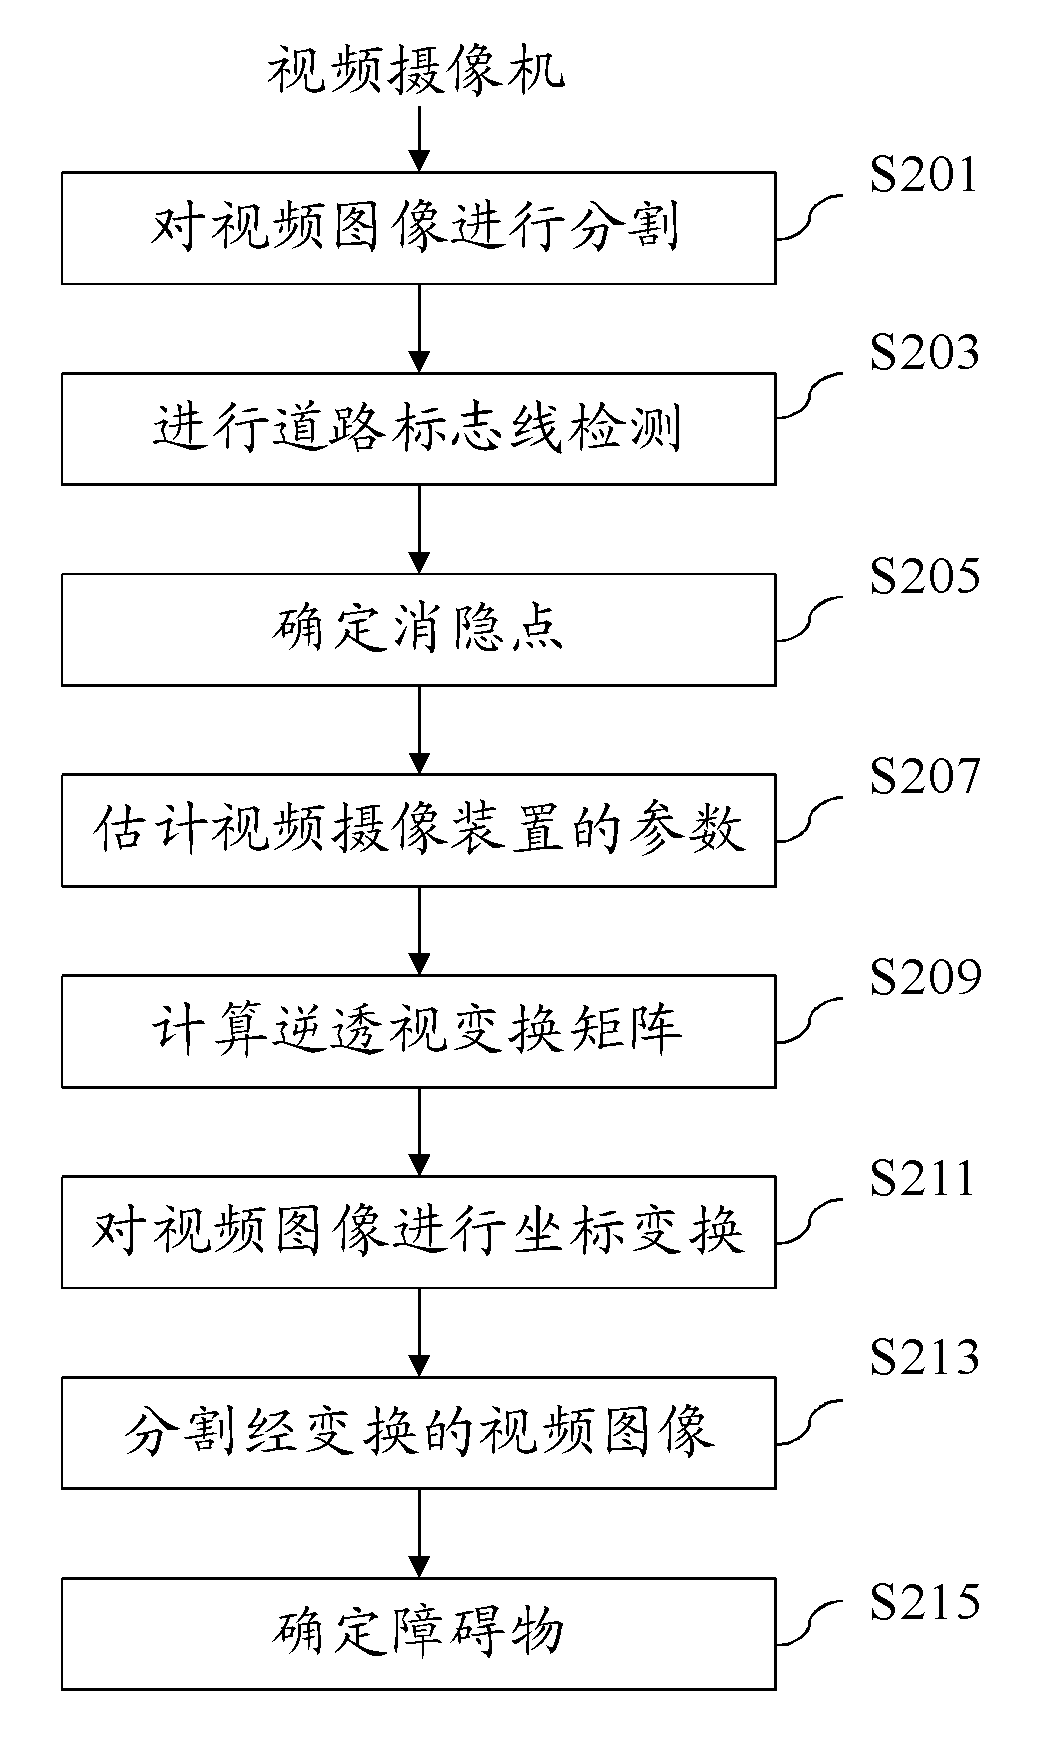 Method and system for detecting road barrier